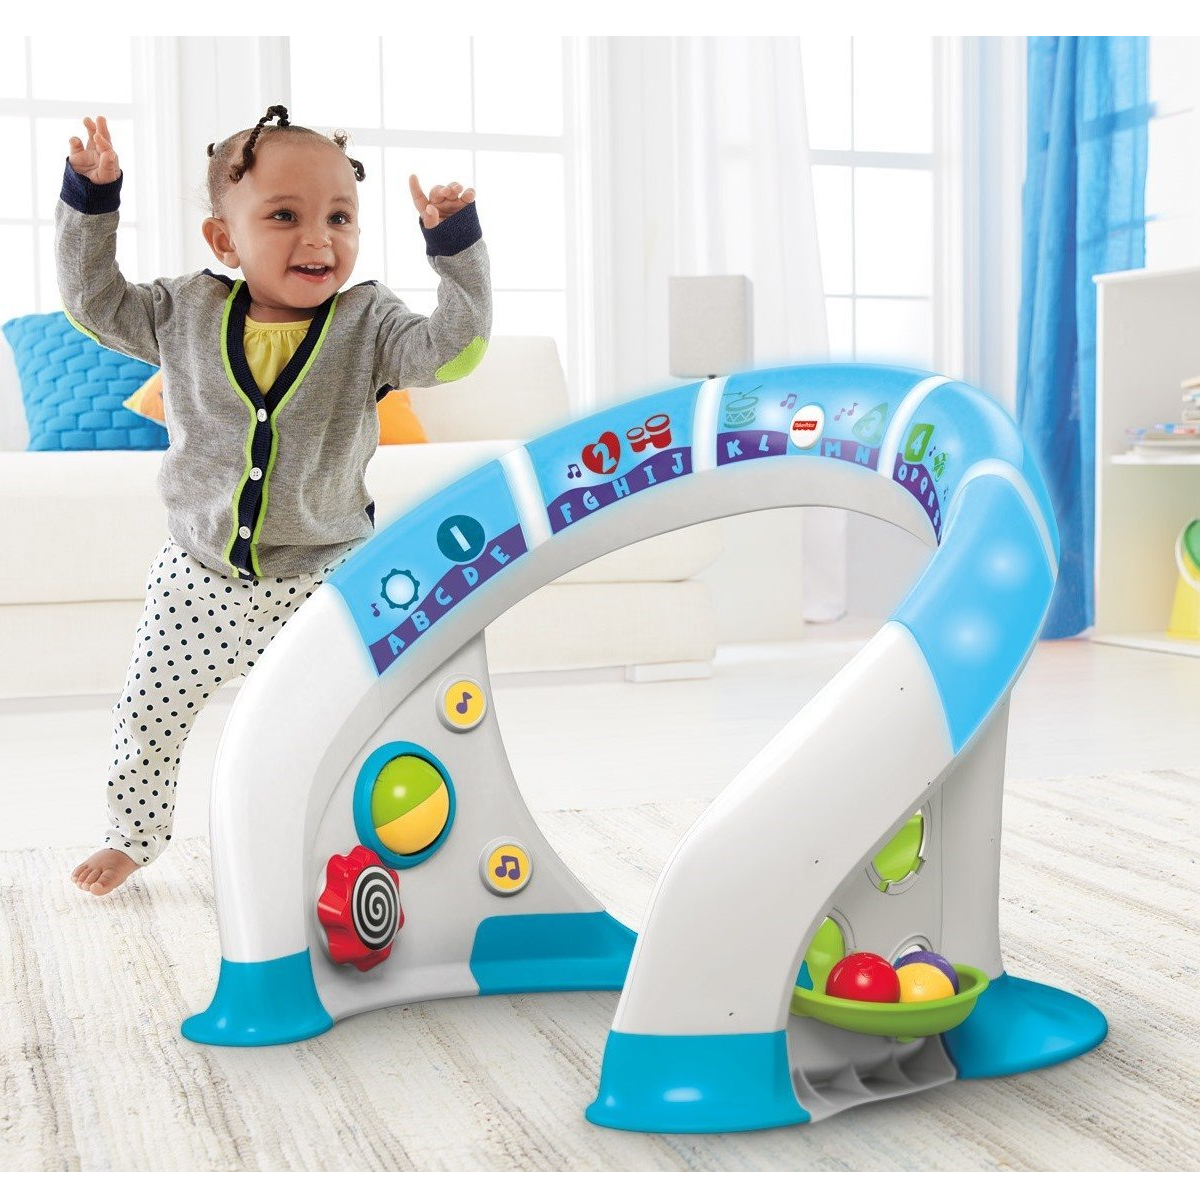 Highly Rated Fisher-Price Bright Beats Smart Touch Play Space Just $36.79 on Amazon! (Reg $59.99)